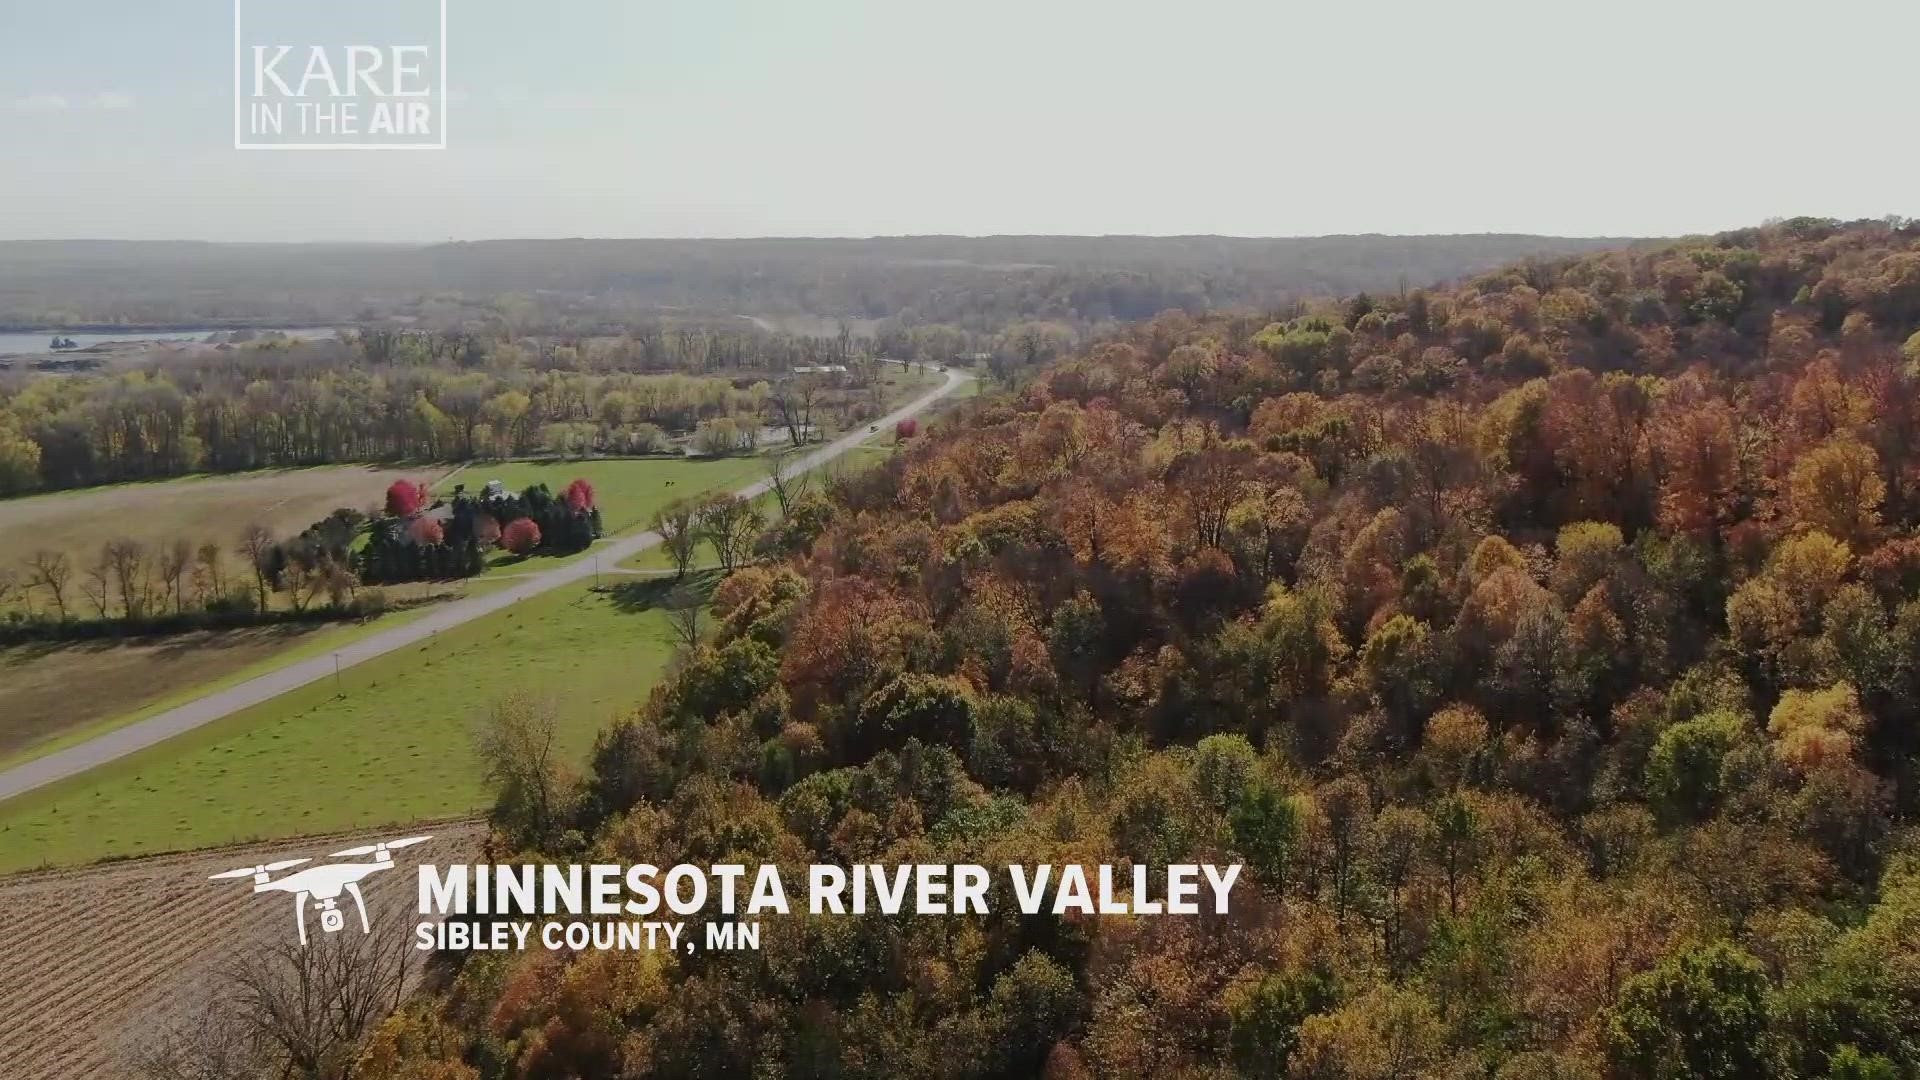 As Minnesota moves deeper into fall, the seasonal colors peak and then fade. Our drone flew over the Minnesota River Valley between Belle Plaine and Le Seuer.